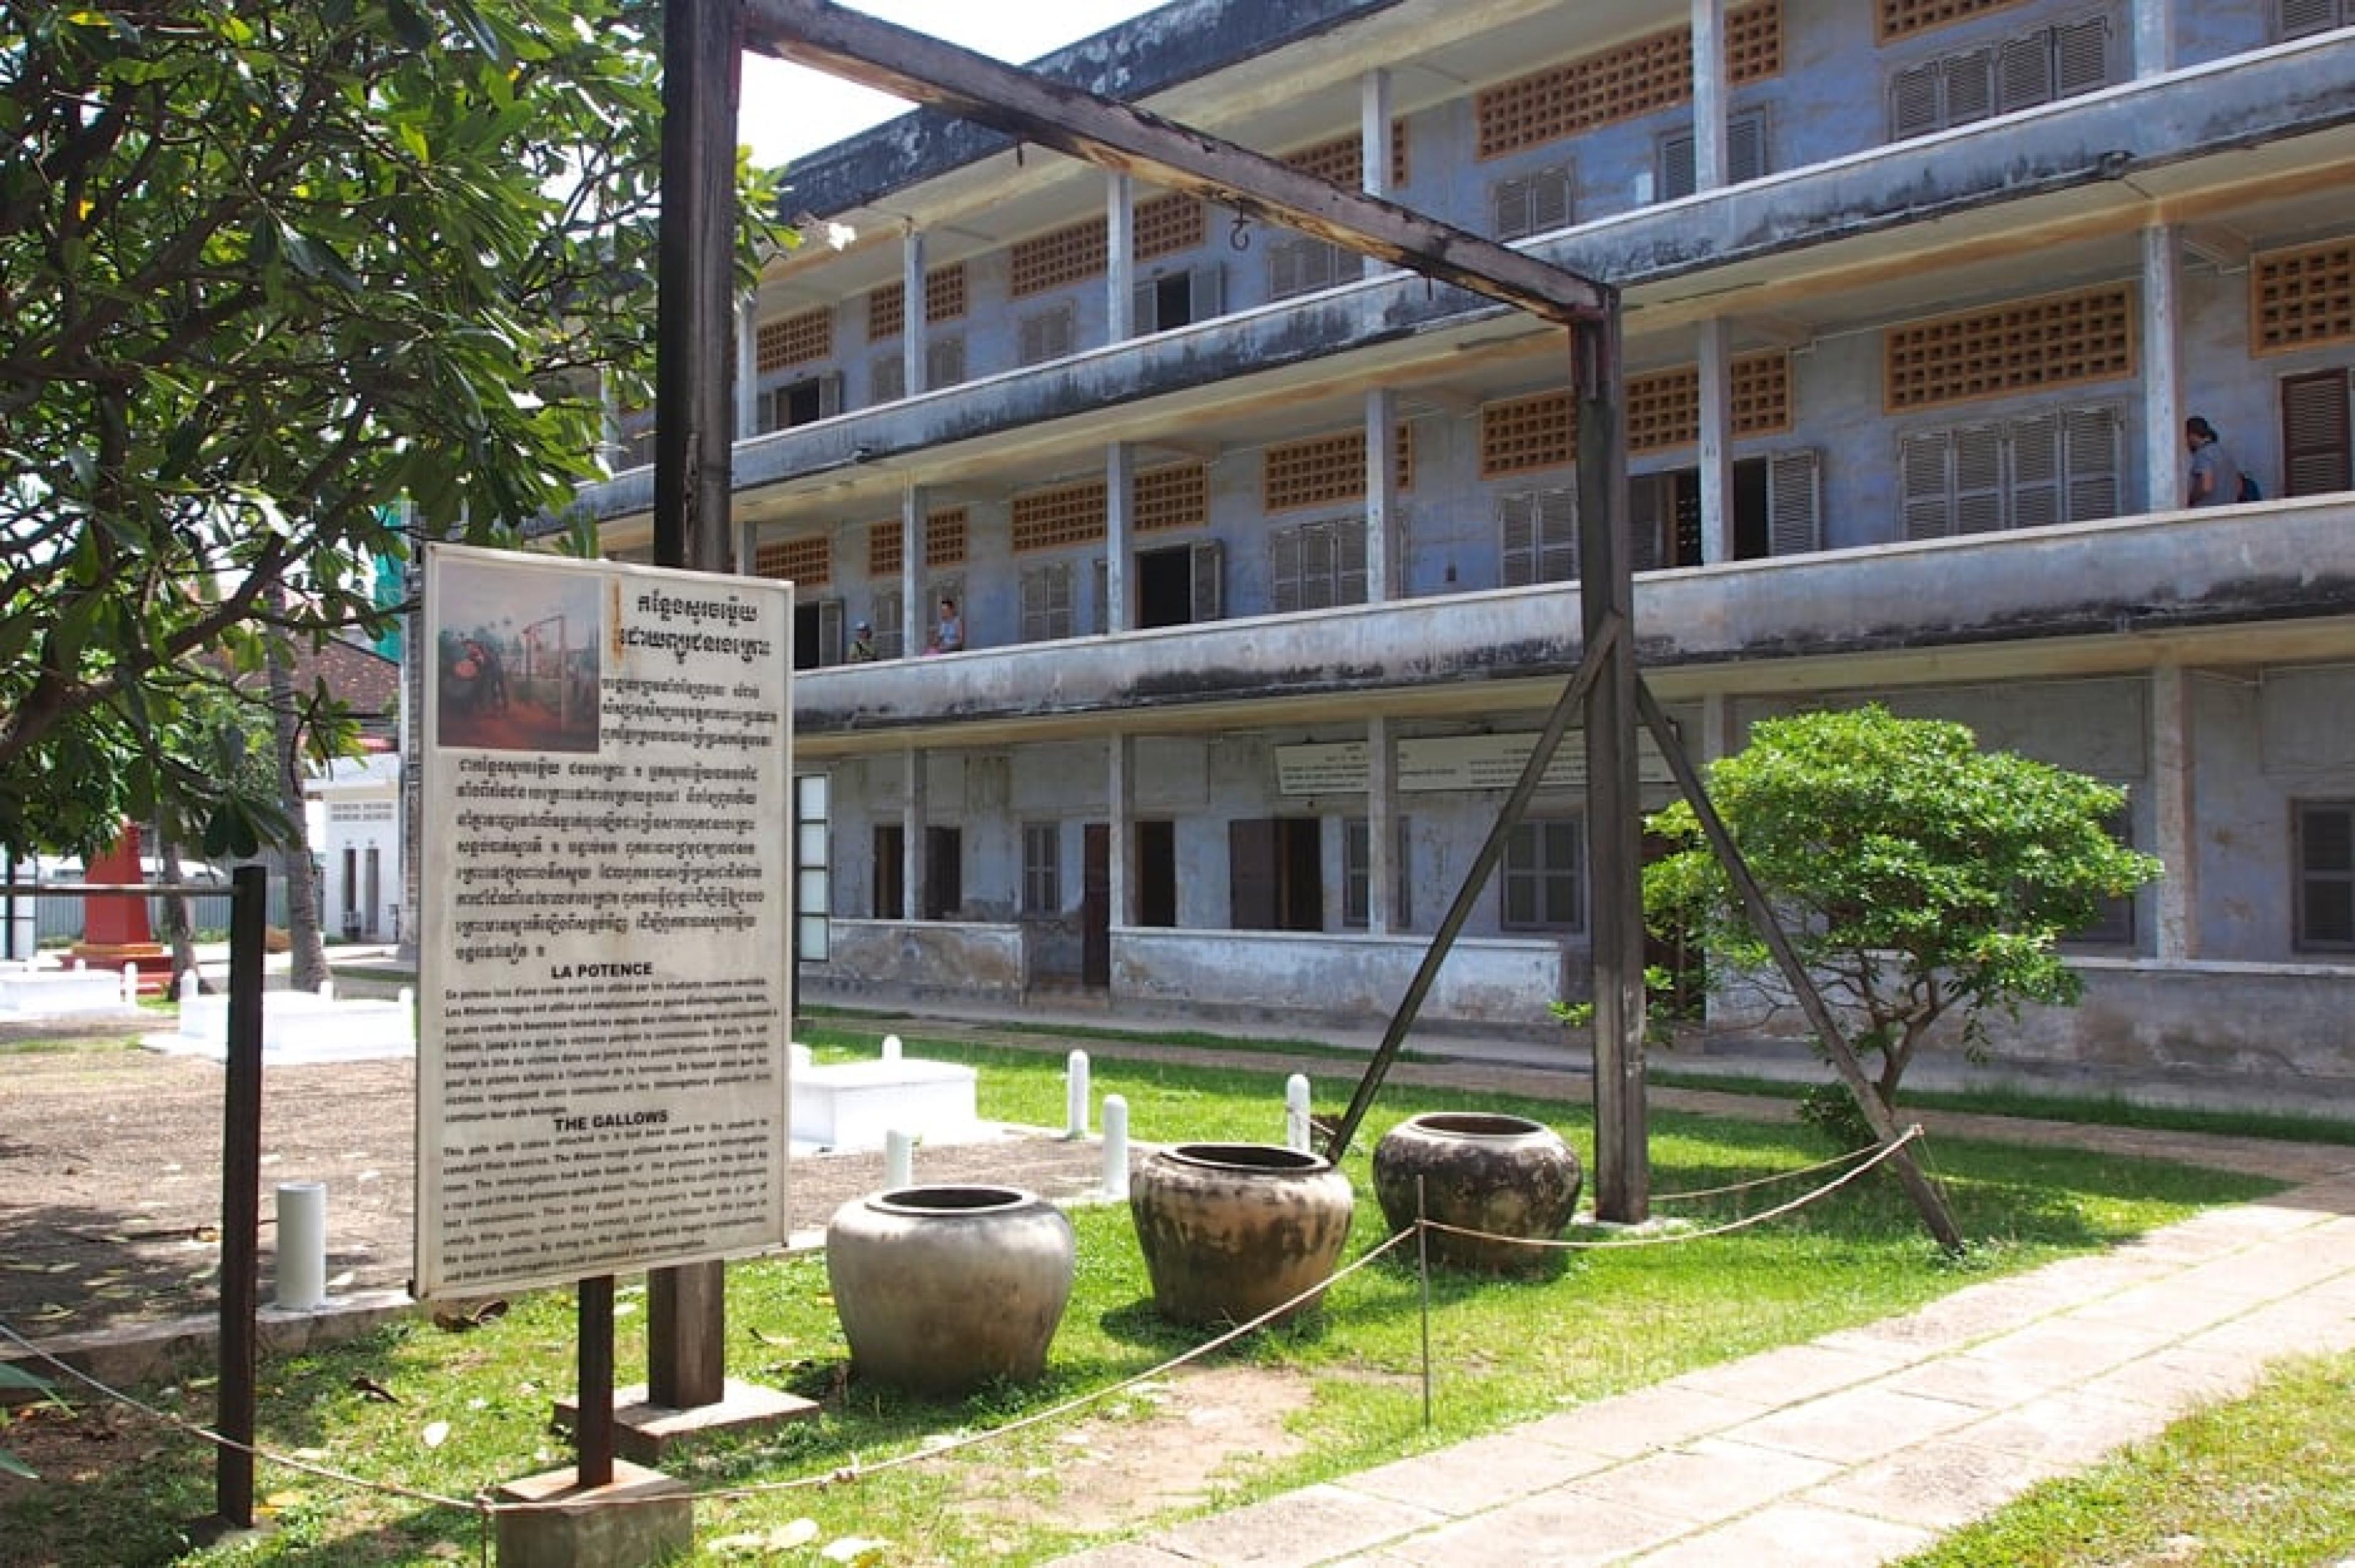 Exterior View - Tuol Sleng Genocide MuseumPhnom Penh, Cambodia - 

Courtesy of Clay Gilliland